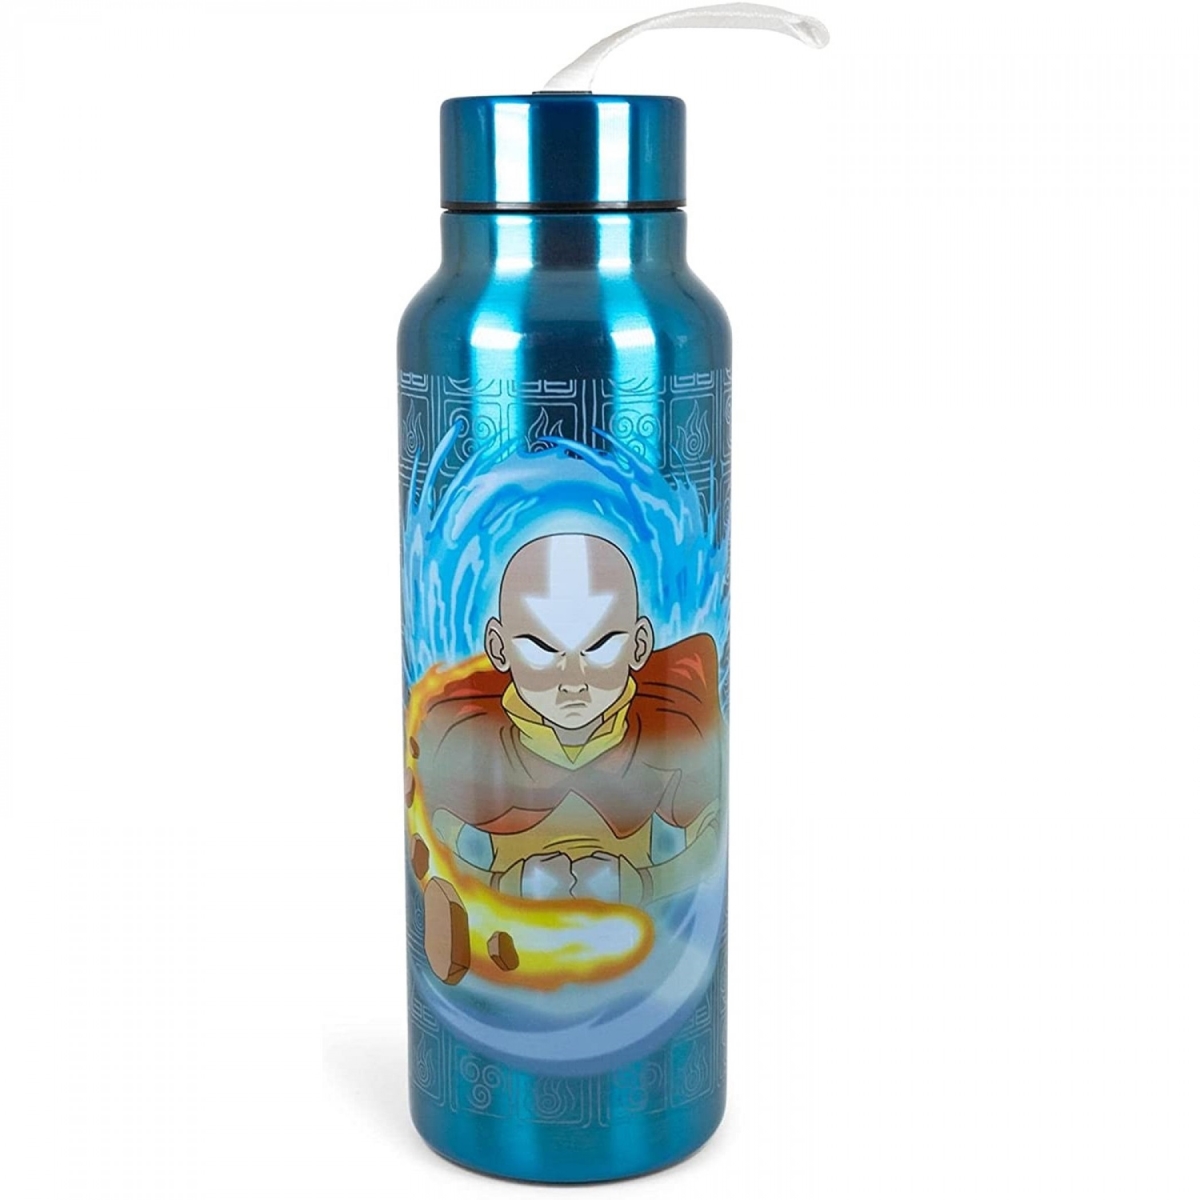 Picture of Avatar the Last Airbender 830865 27 oz Elements Stainless Steel Water Bottle with Strap